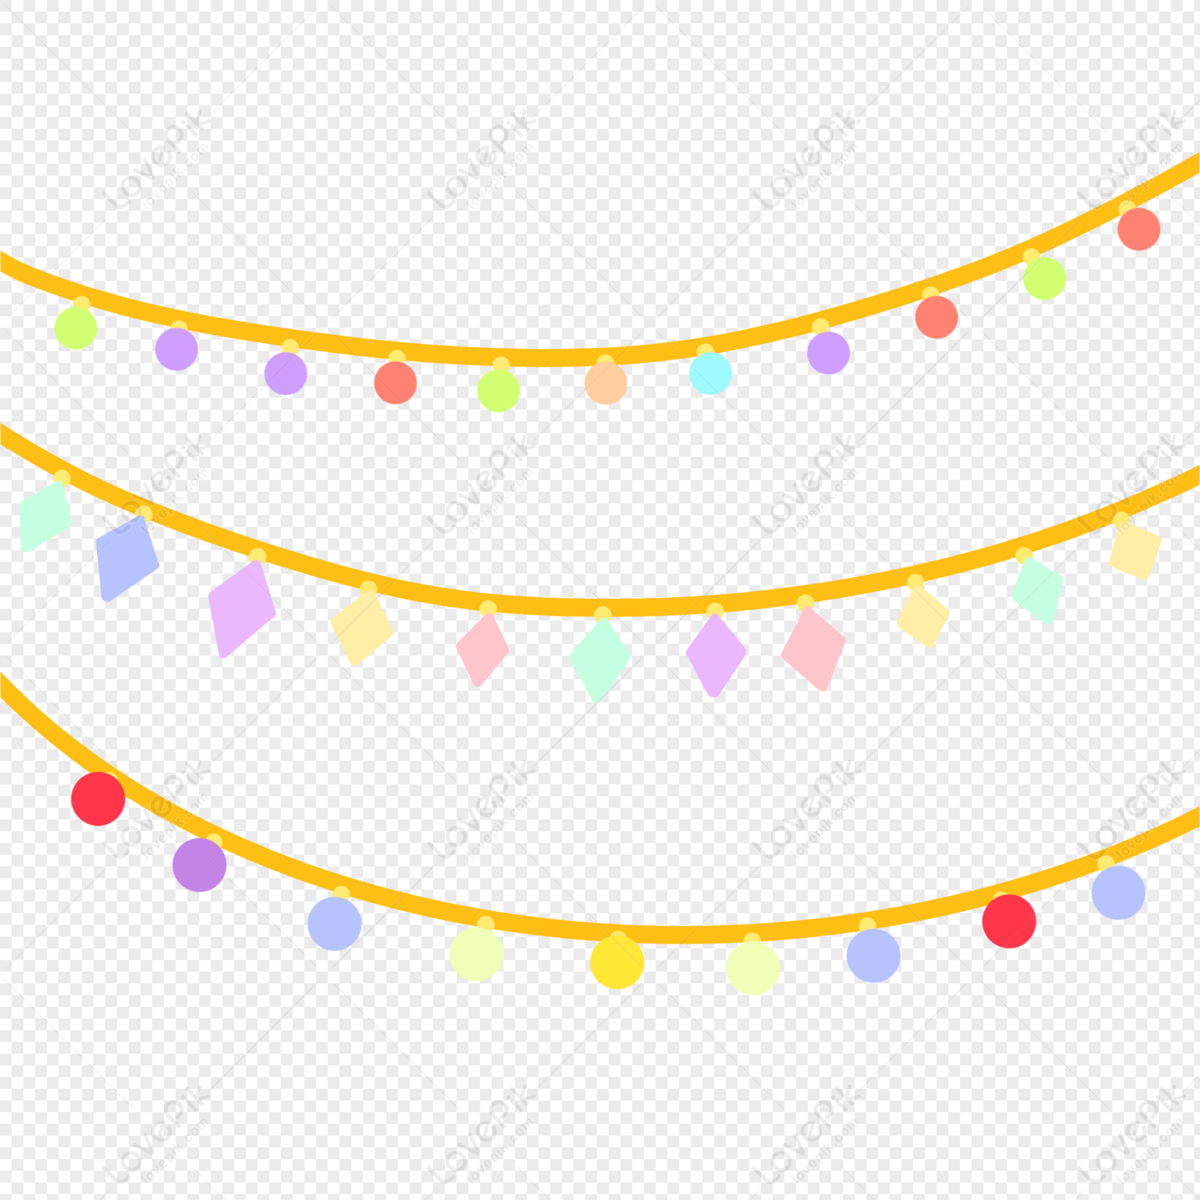 Cartoon String Lights PNG Transparent Background And Clipart Image For Free  Download - Lovepik | 401253450